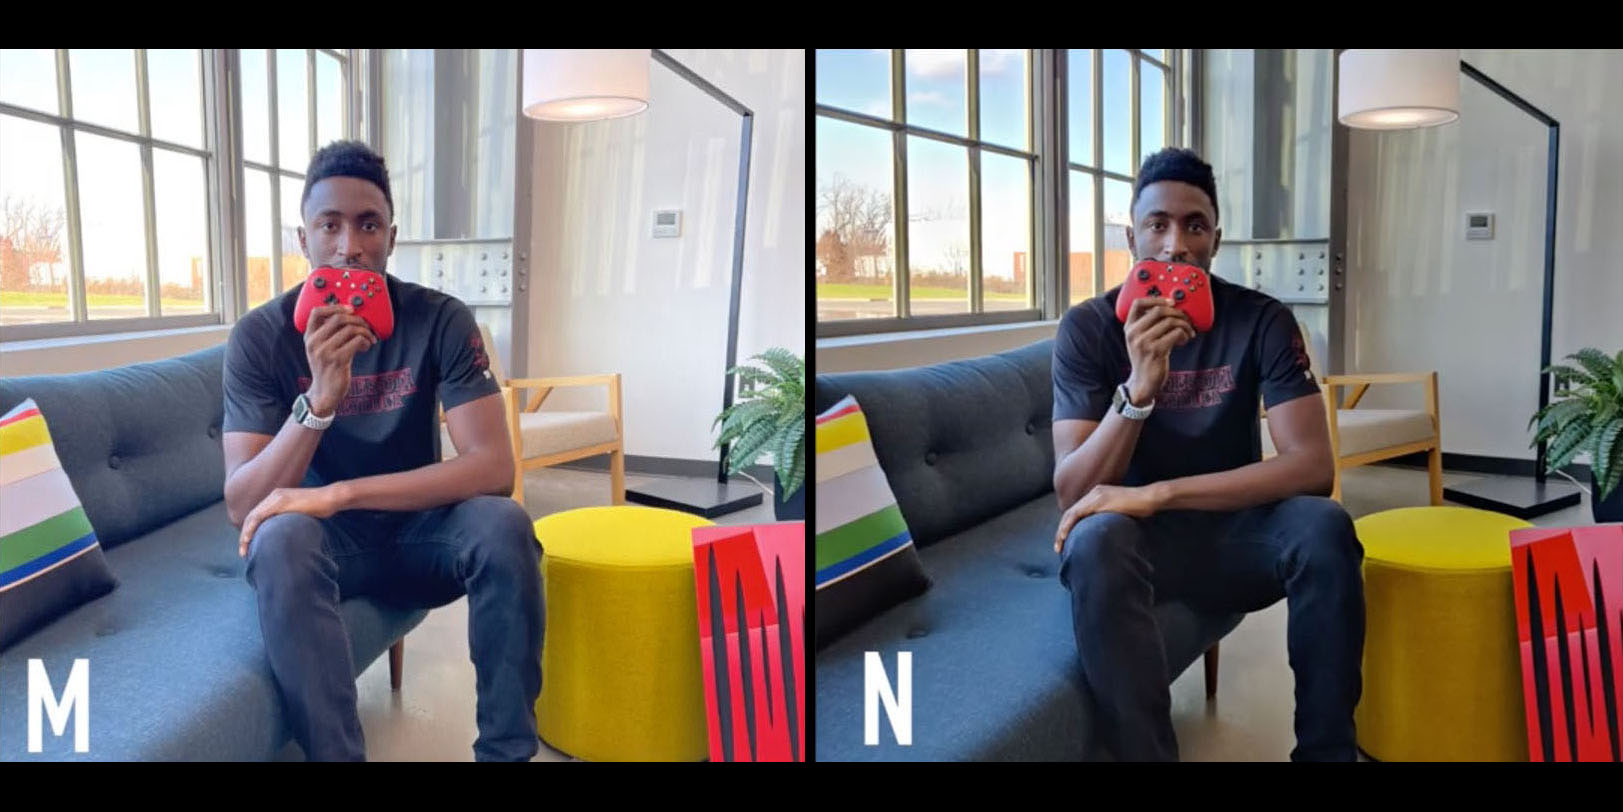 photo of Comment: Here’s why I disagree with the voters in the MKBHD blind camera test image